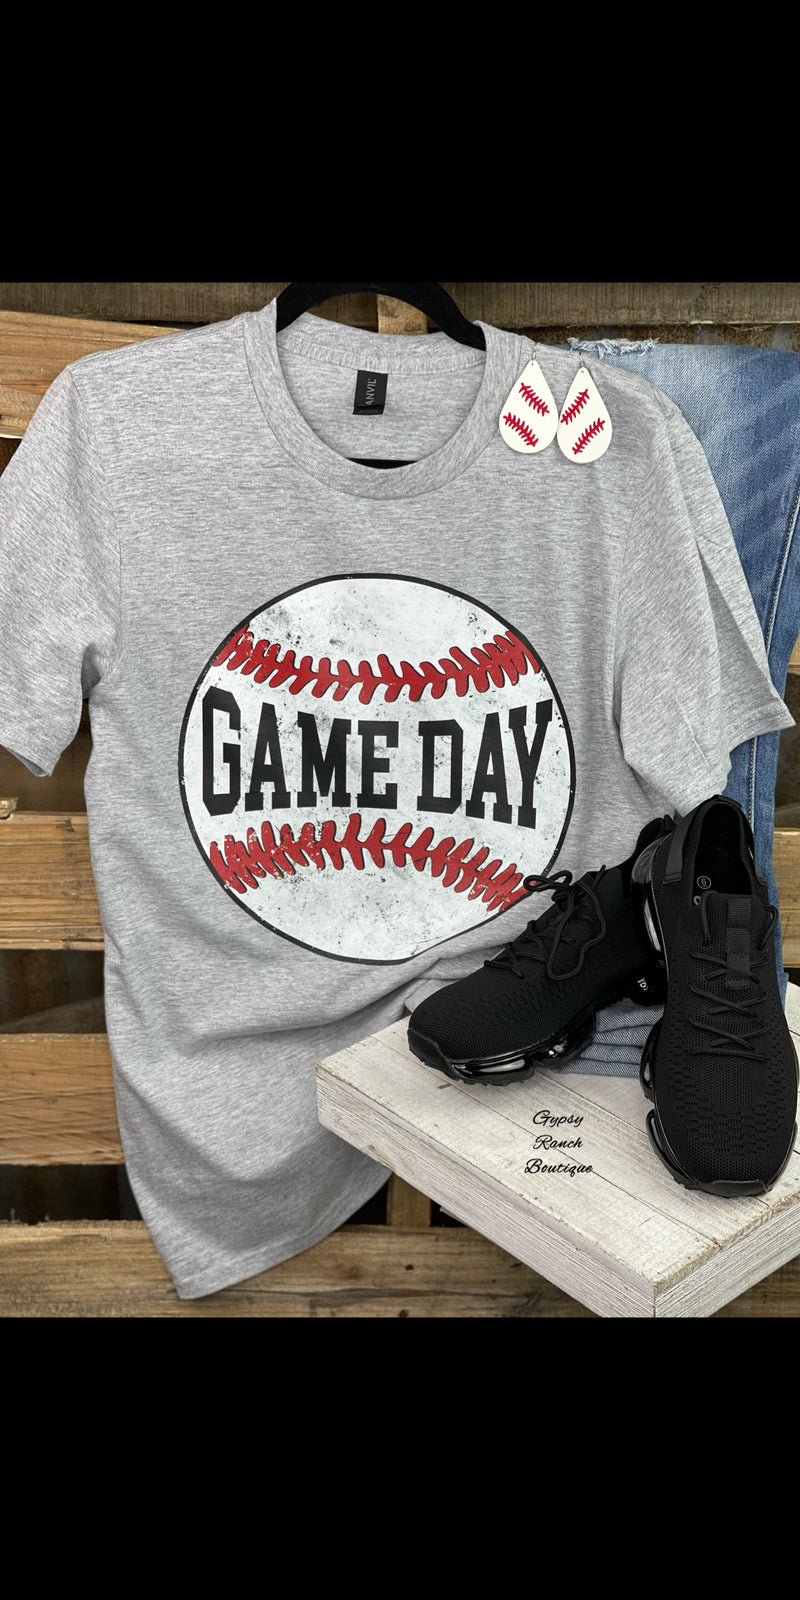 GAME Day Baseball Top - Also in Plus Size